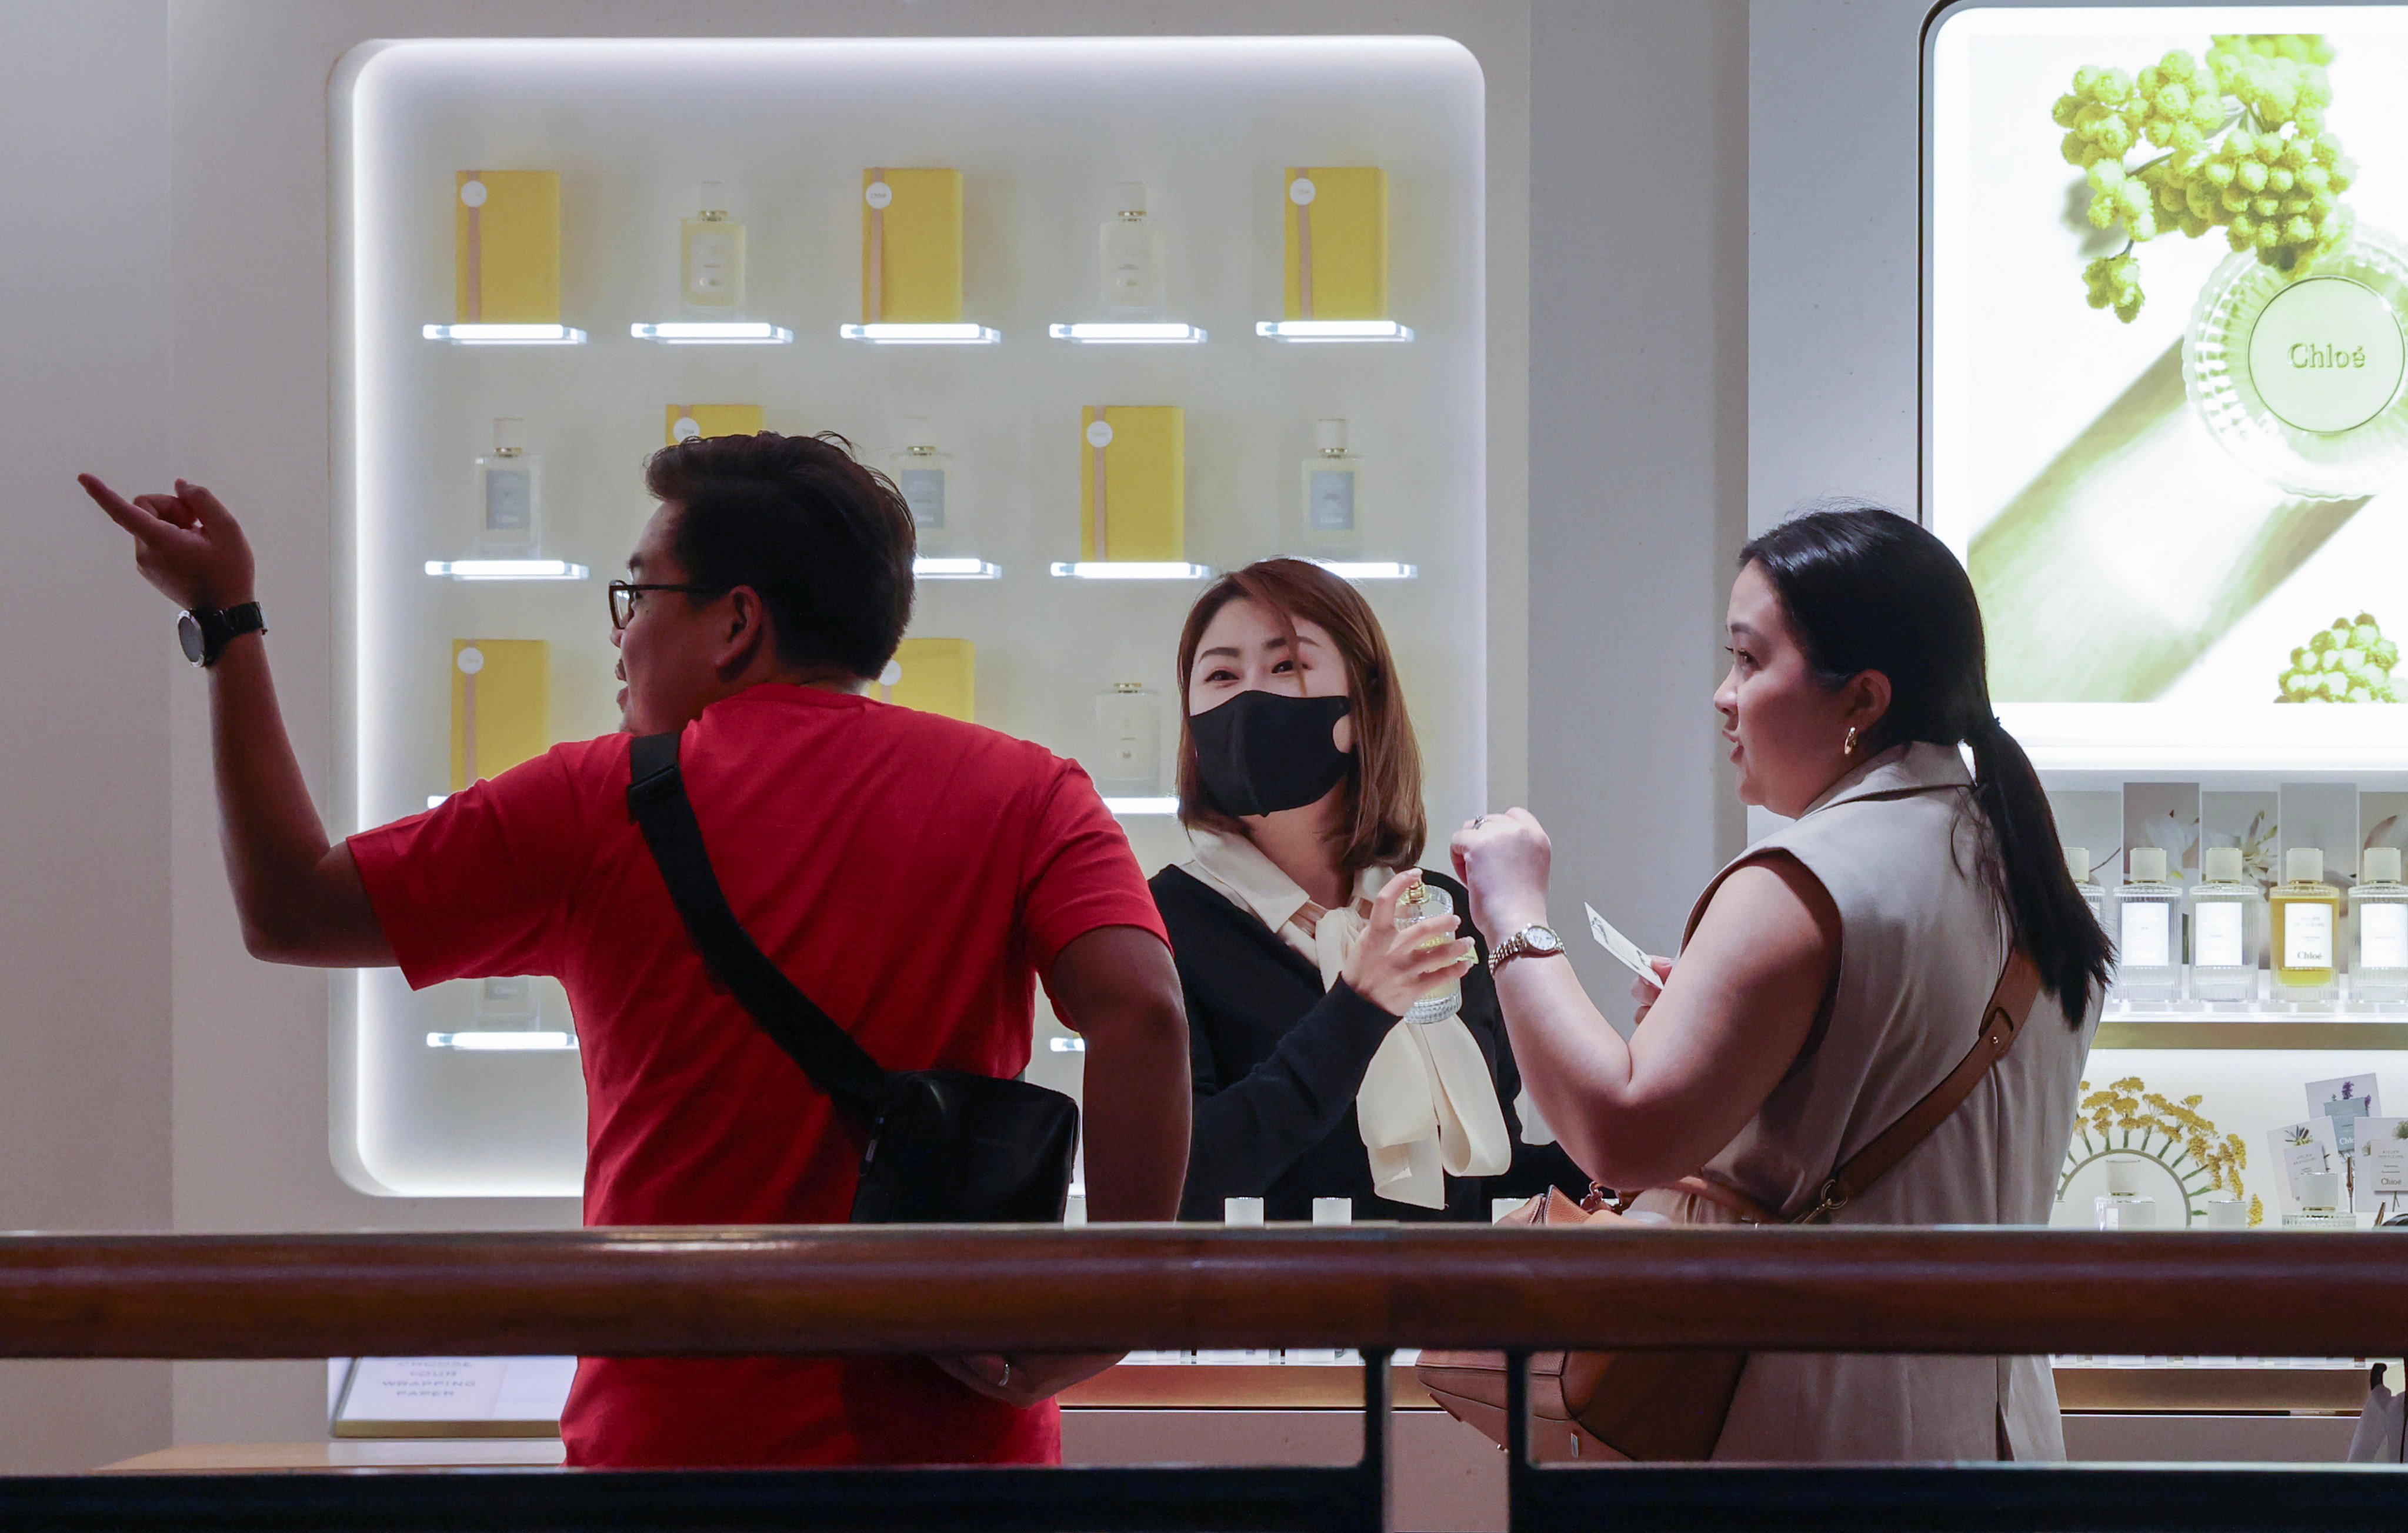 Store staff serving customers at a shopping centre in Tsim Sha Tsui on June 4. Hong Kong retailers have been struggling as local shoppers flock to the mainland for bargains while mainlanders are turning to Hainan as their top luxury shopping destination. Photo: Jelly Tse